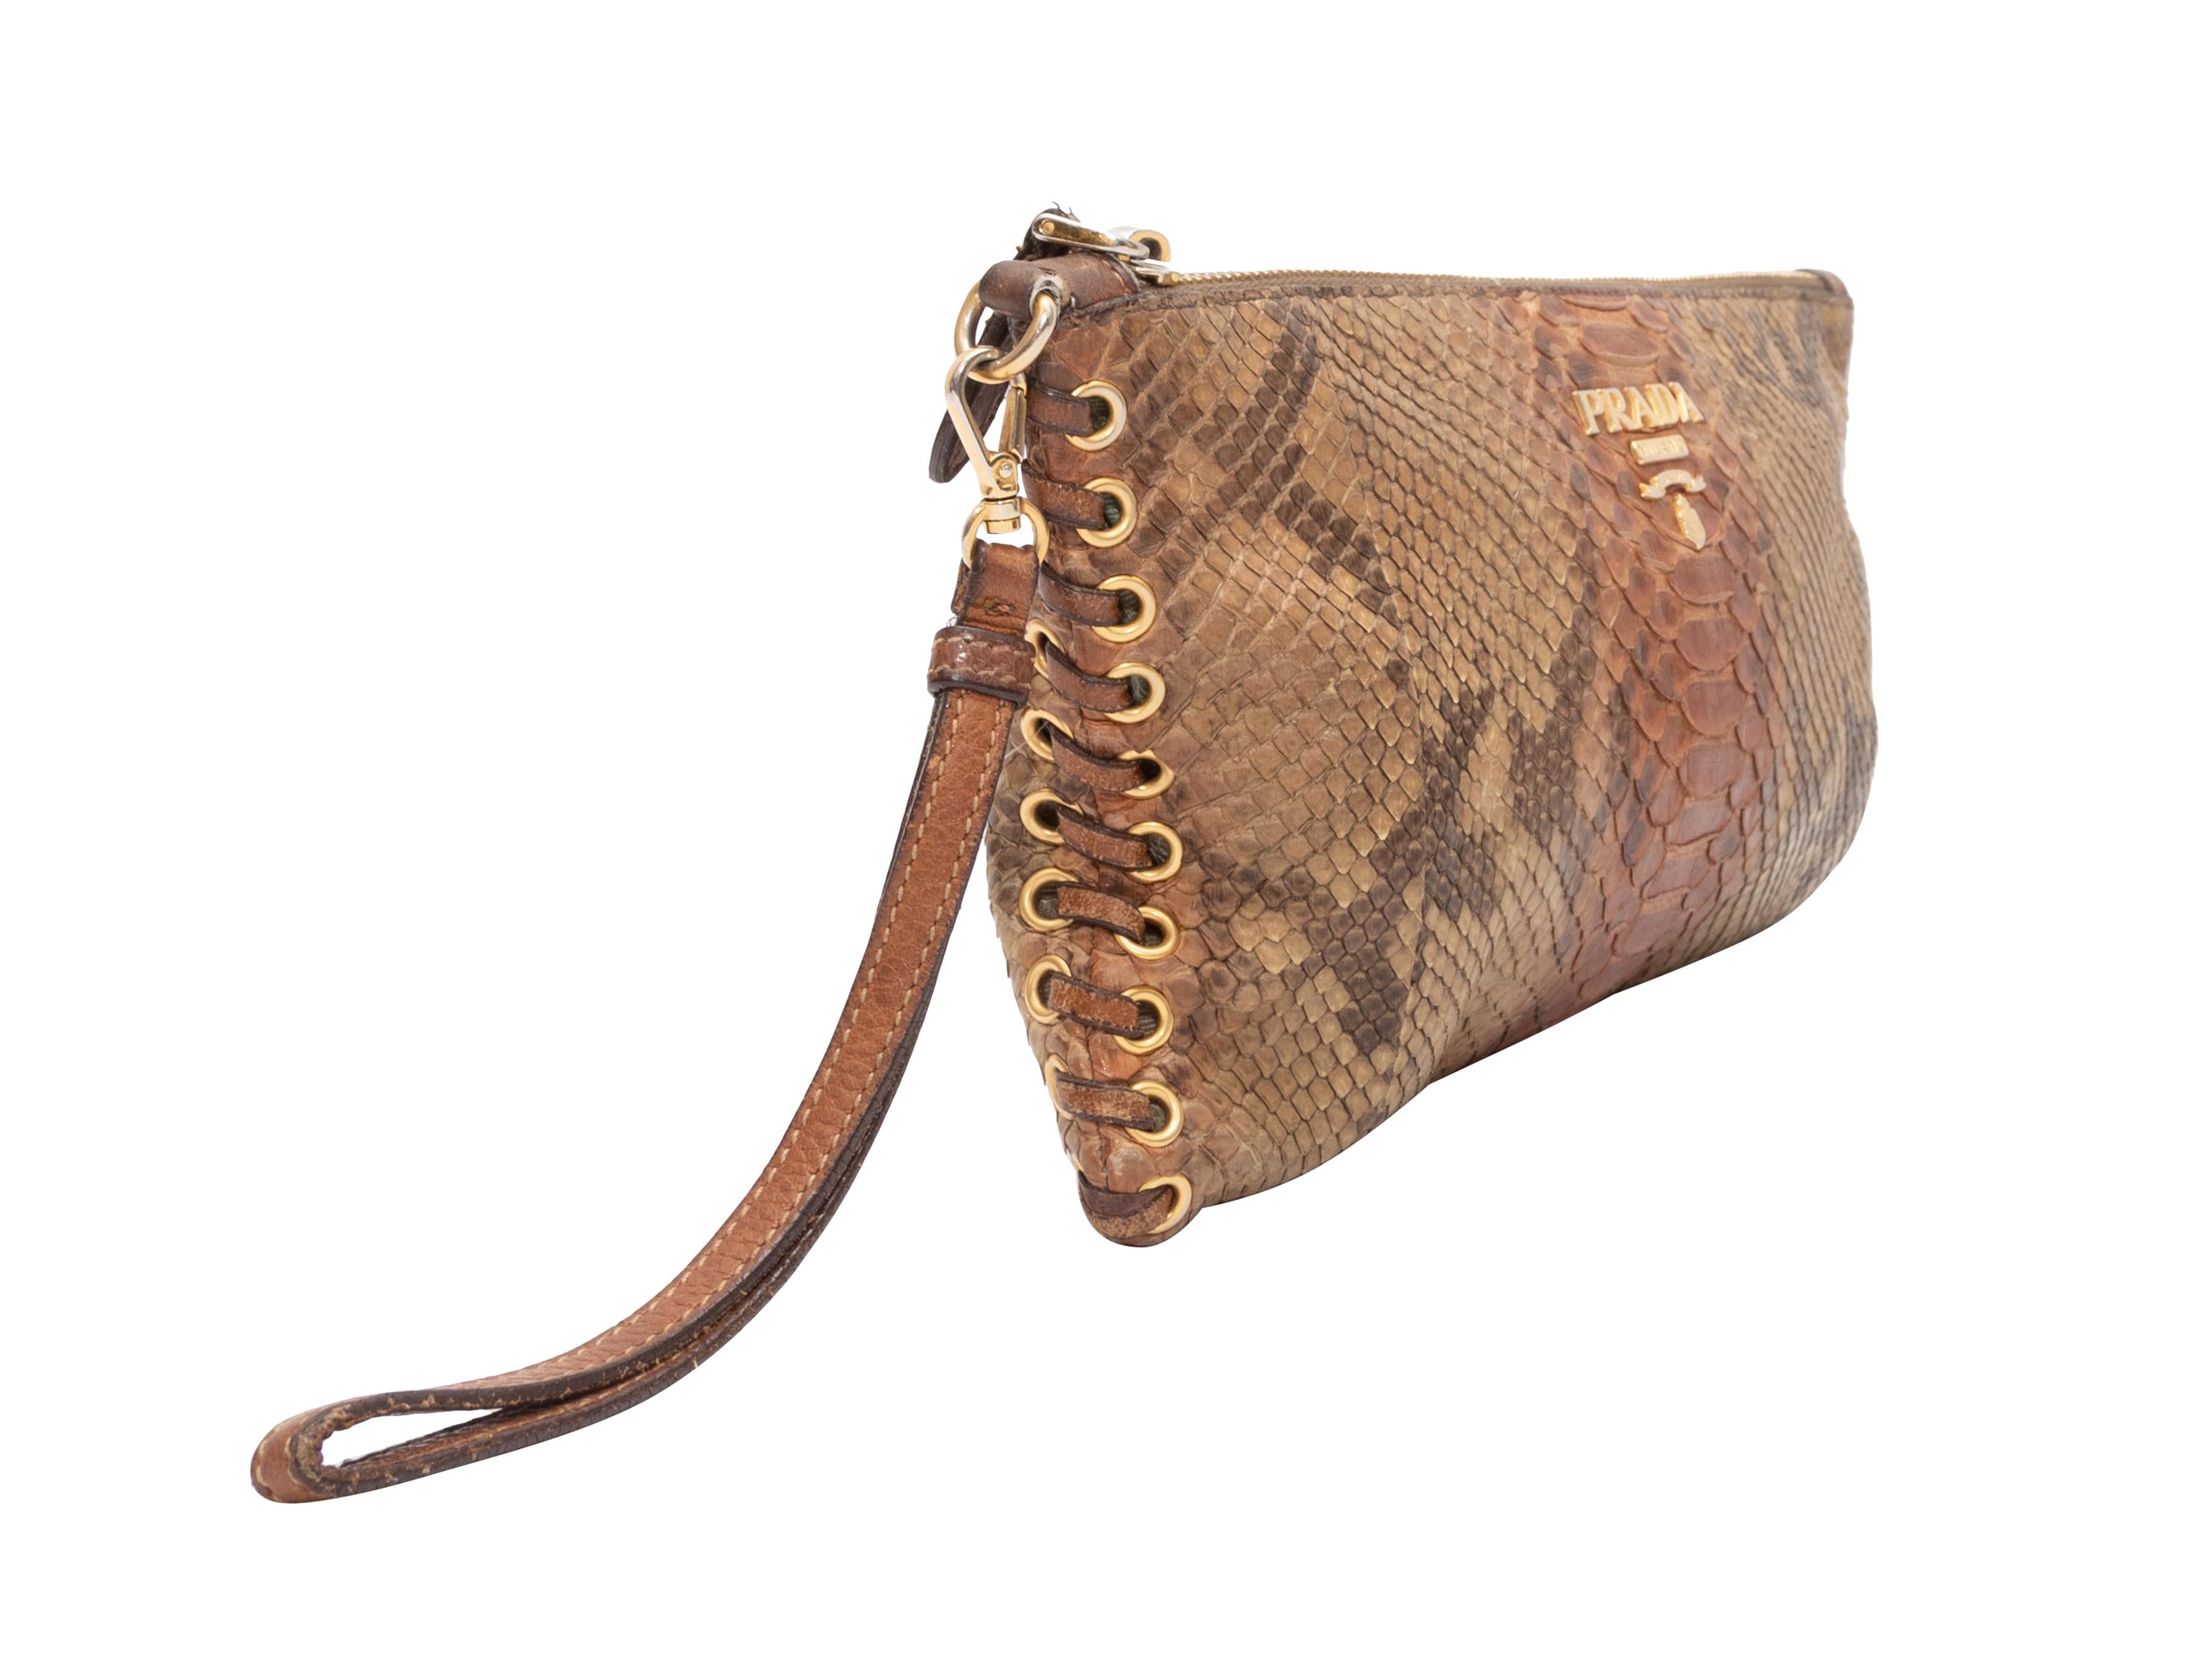 Product Details: Tan Prada Snakeskin Wristlet Clutch. This clutch features a snakeskin body, gold-tone hardware, nylon interior, optional wristlet strap, and a top zip closure. 10